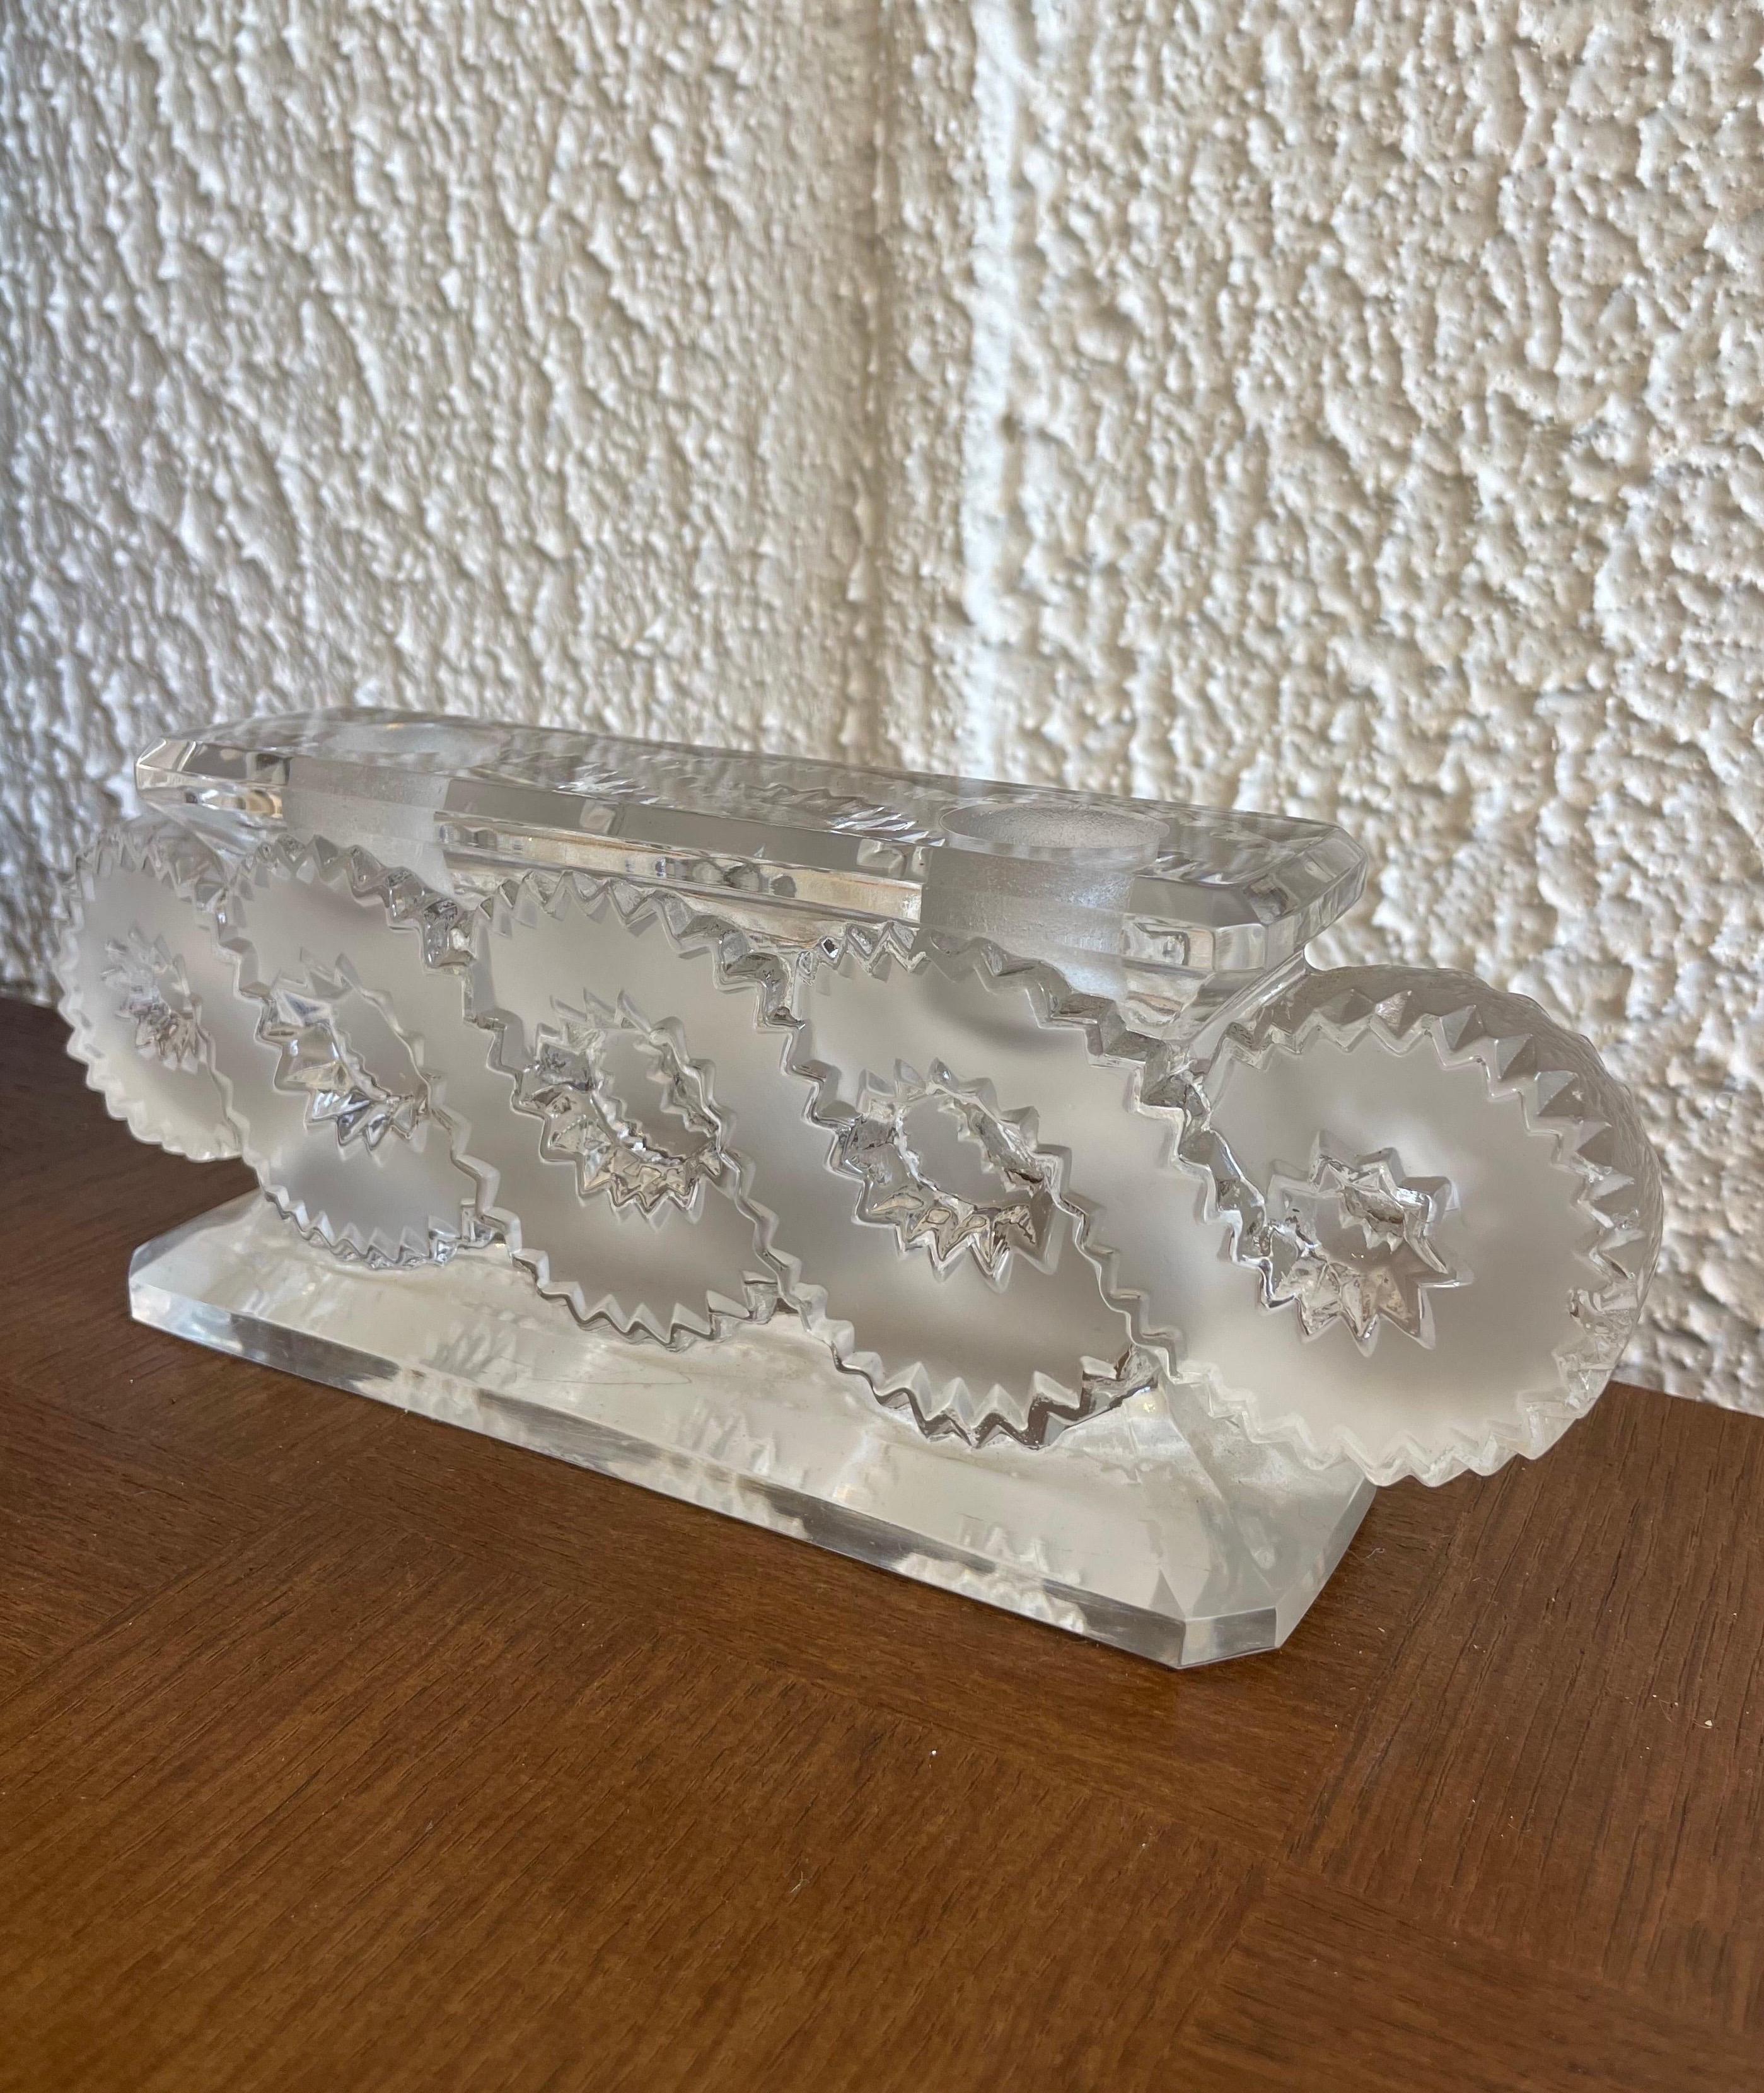 Stunning René Lalique 1940s double candle holder signed Lalique in frosted glass. In excellent vintage condition.